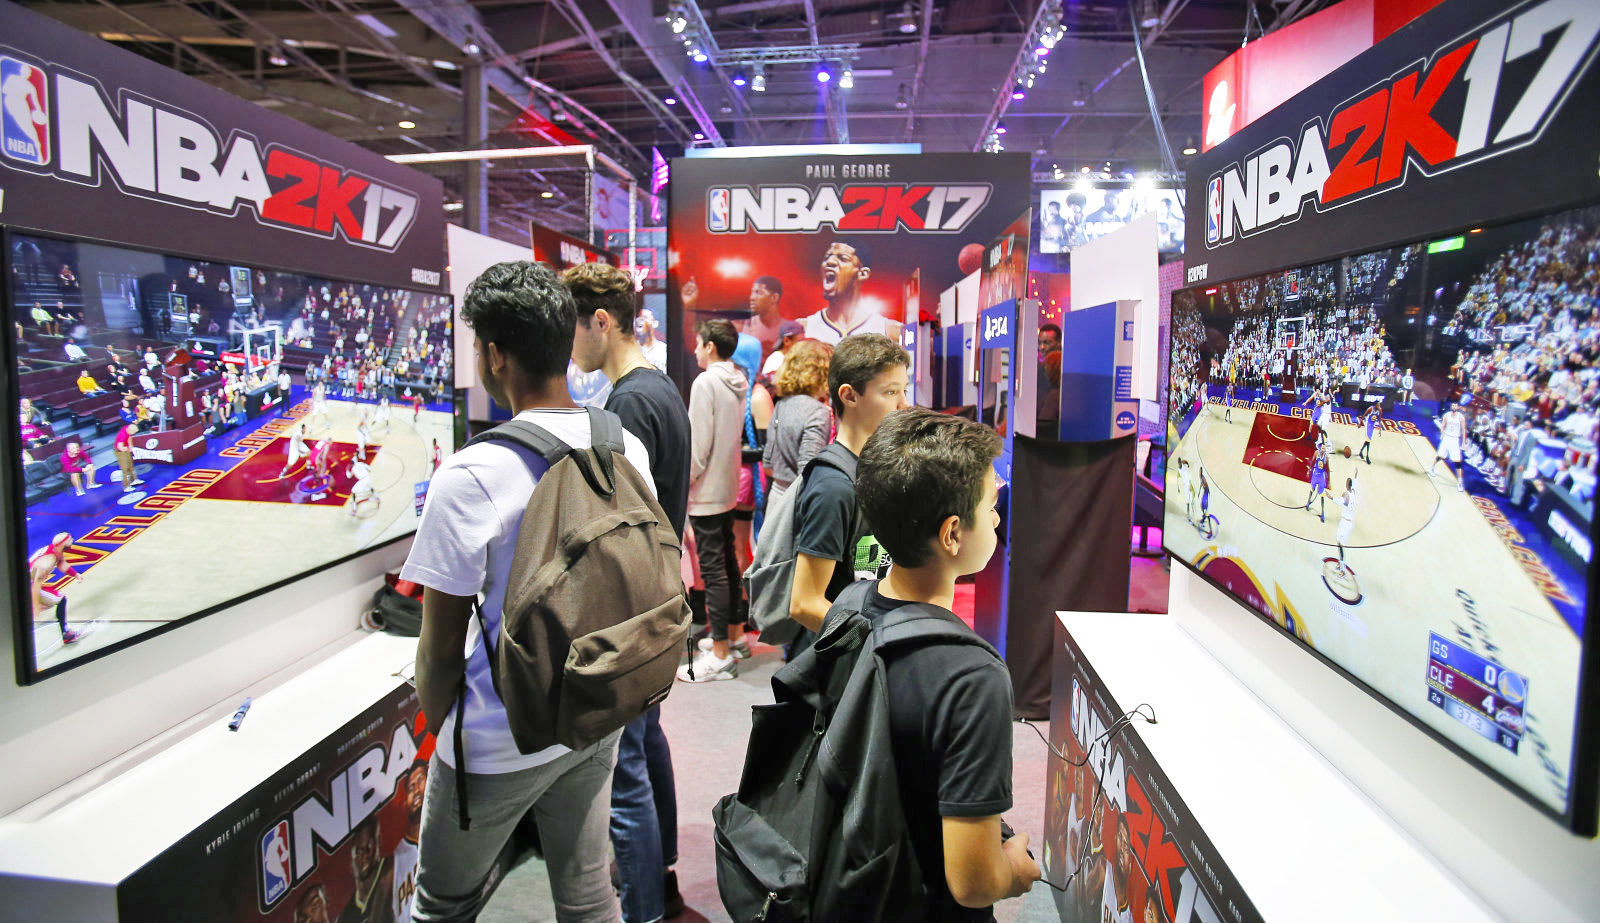 New NBA 2K League Coming To Twitch